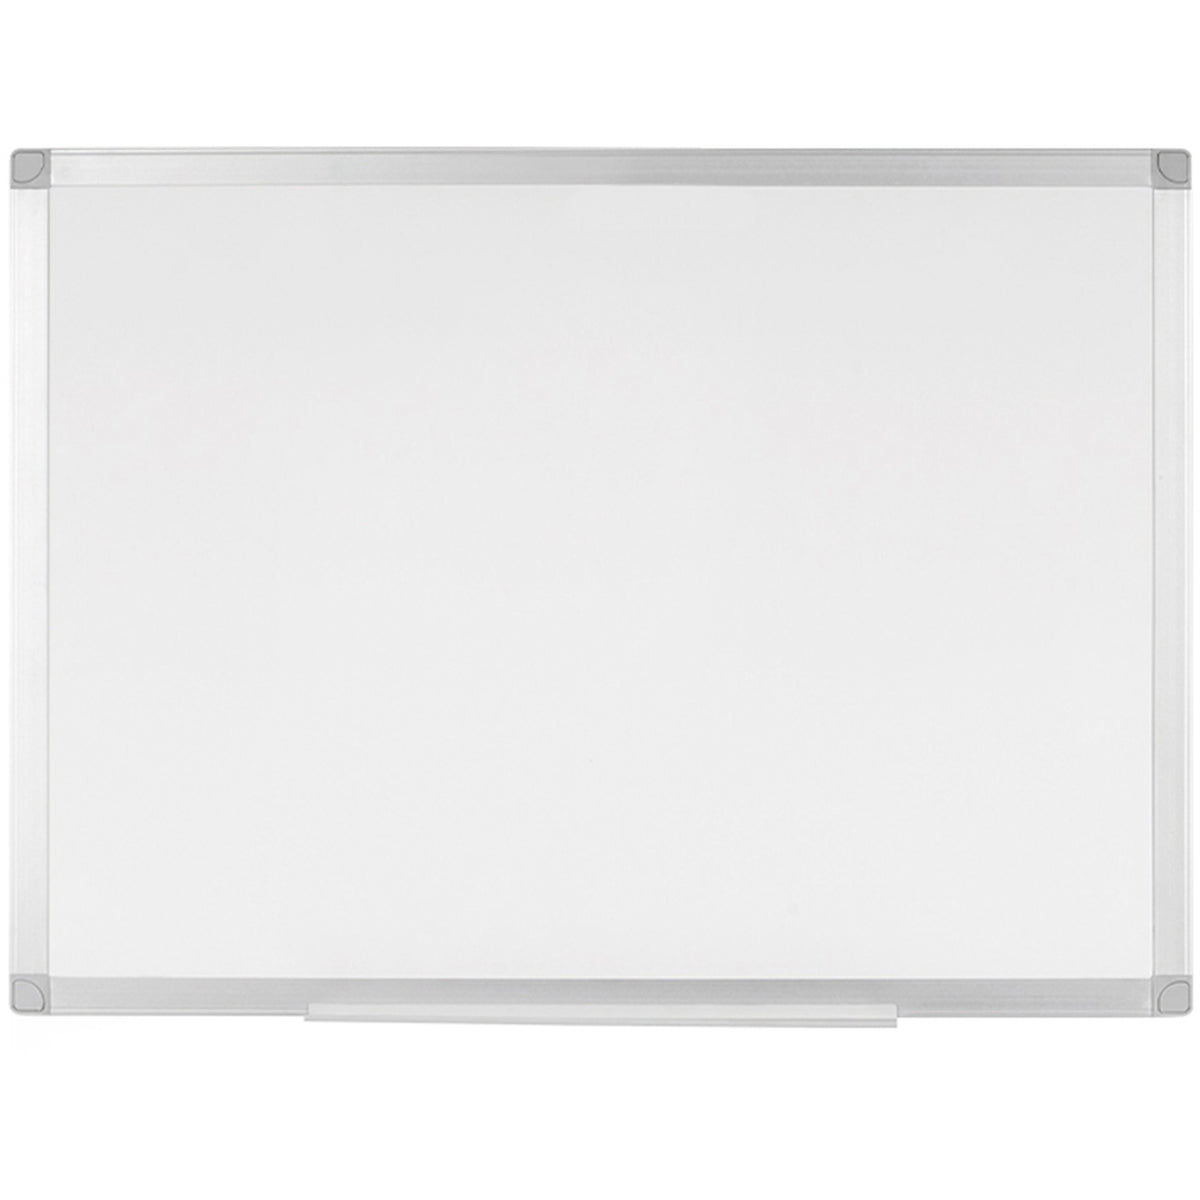 CR08999214 Ayda Magnetic Porcelain Dry Erase White Board, 36" x 48", Aluminum Frame, Wall Mounting Kit by MasterVision